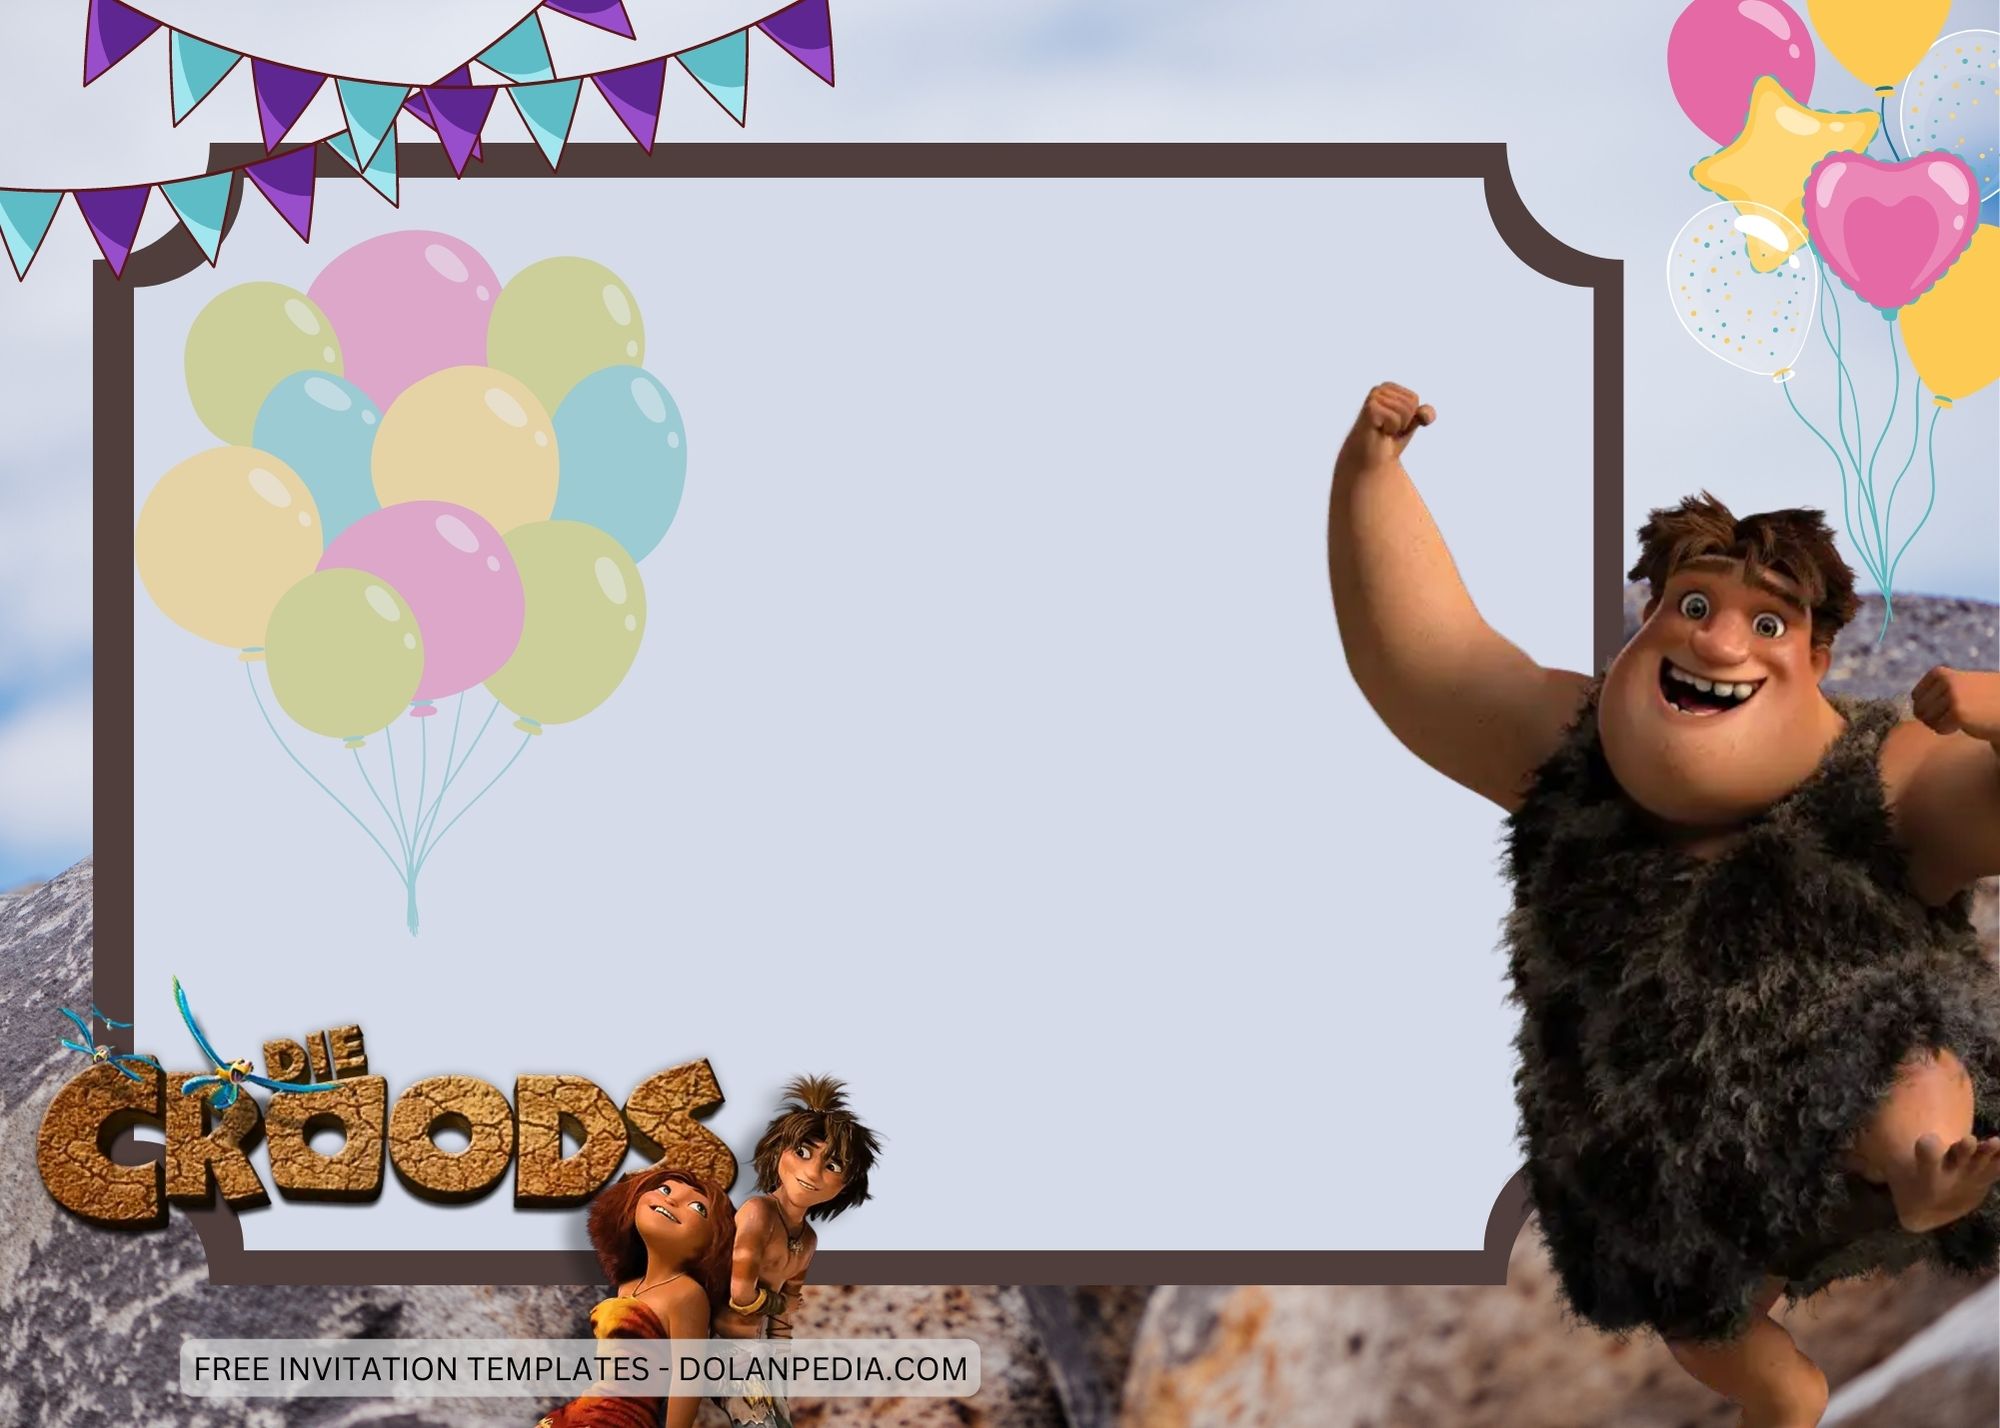 Blank The Croods Birthday Invitation Templates Two